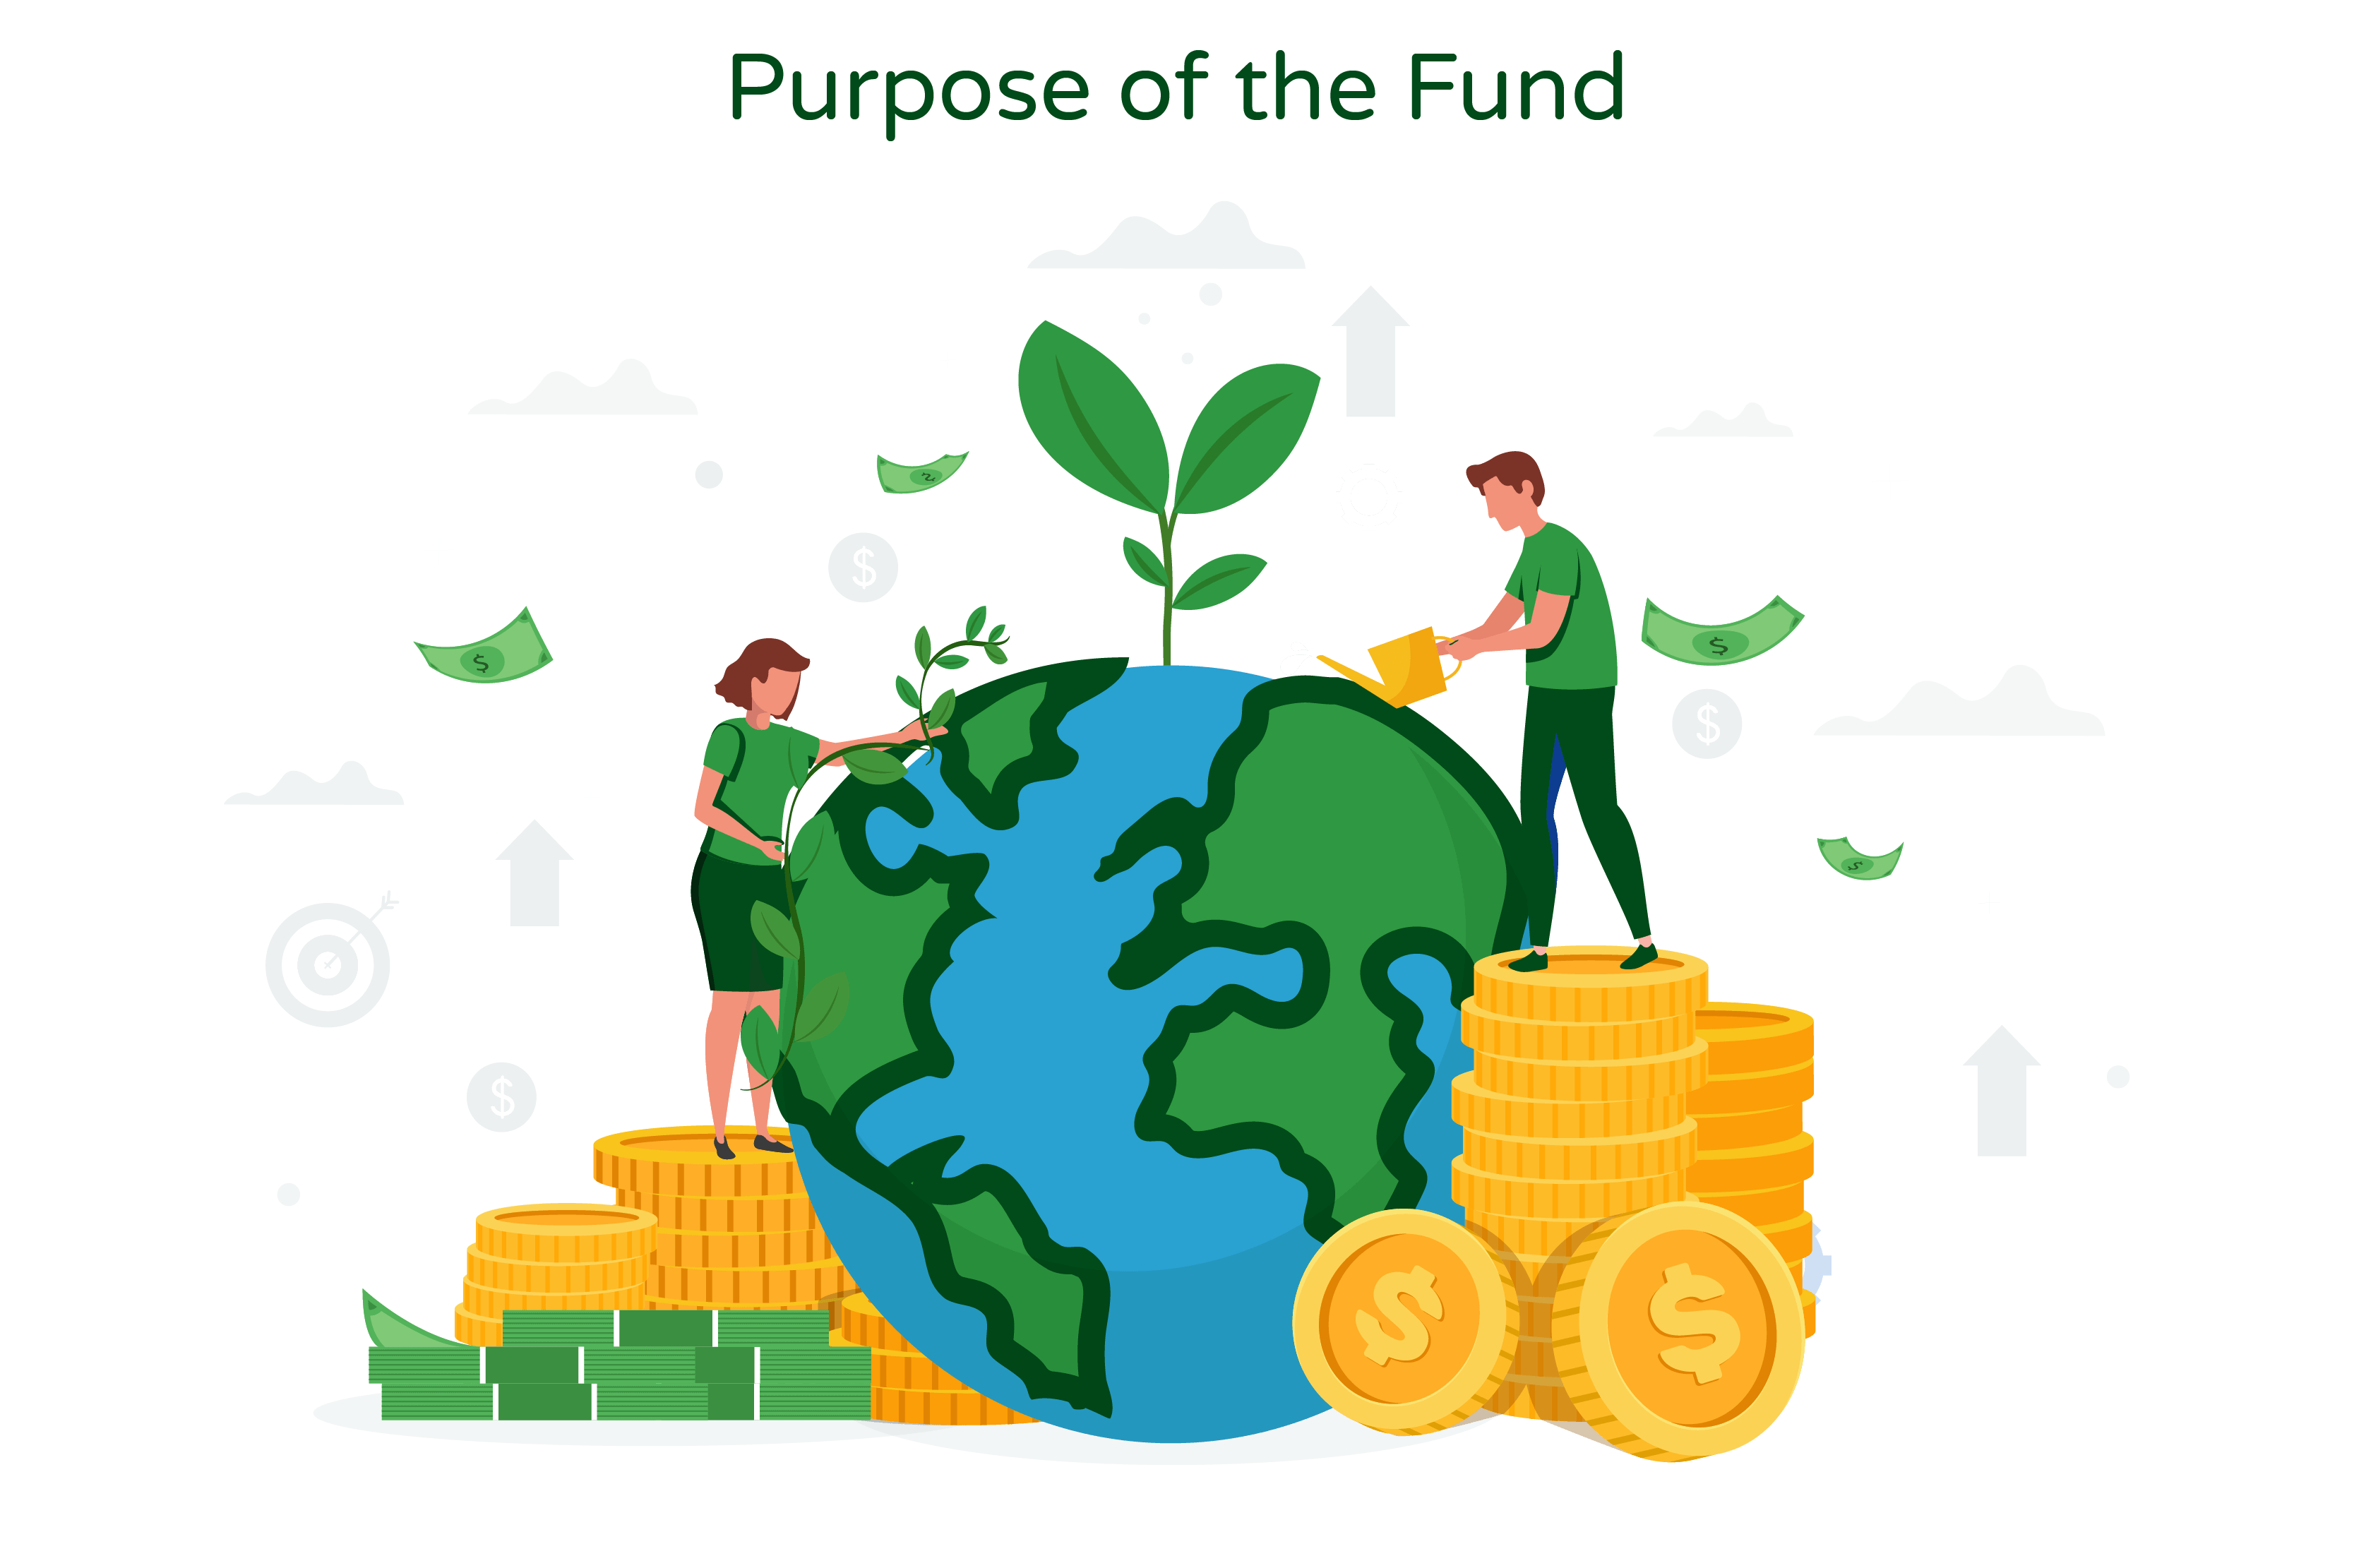 Illustration titled 'Purpose of the Fund.' The illustration depicts two people watering a globe using funds. The individuals symbolize the allocation of financial resources towards global initiatives. On the top of the globe, there are leaves, representing the nurturing and sustainable growth that can be achieved through the proper use of funds. The illustration represents the purpose of the fund as a means to support and foster positive environmental and societal outcomes on a global scale.